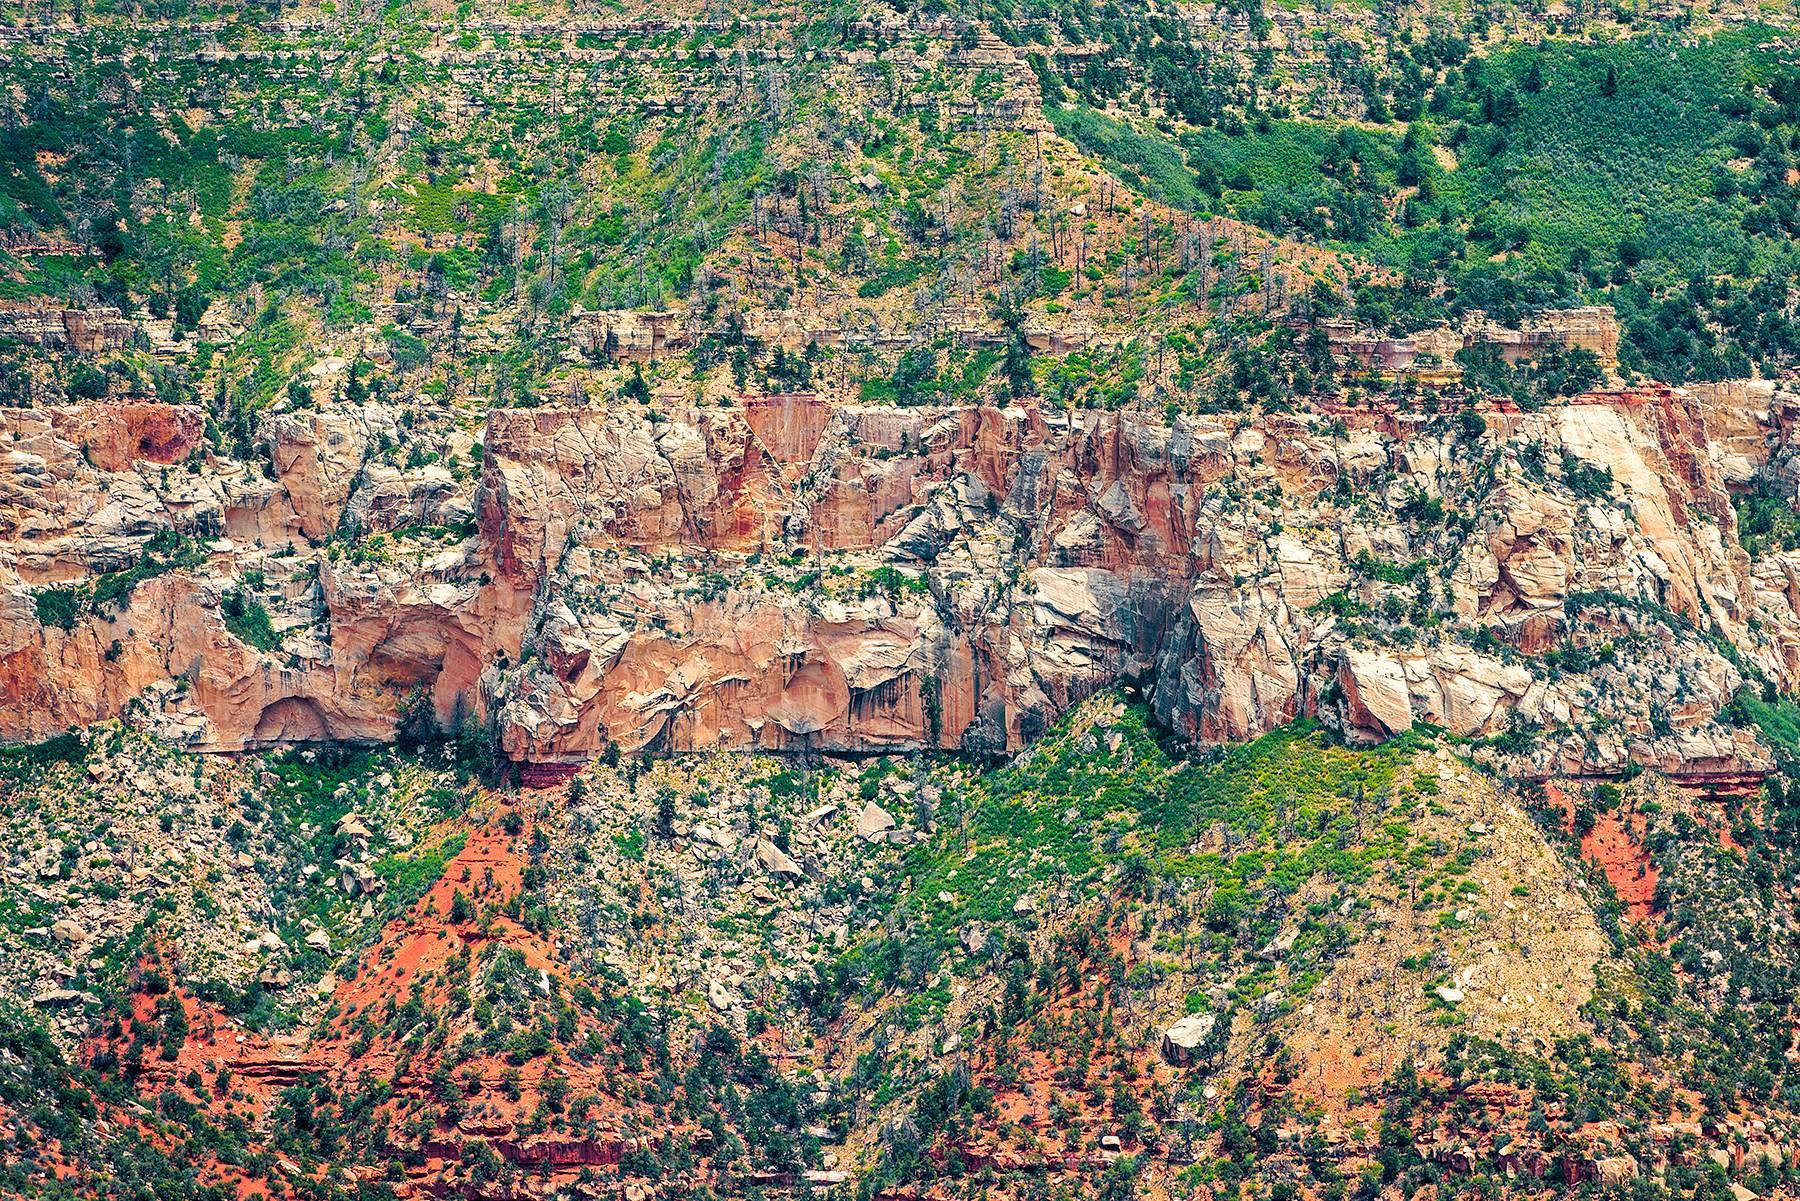 Zoe Wetherall Abstract Photograph - "Grand Canyon", dye sublimated print on aluminum 